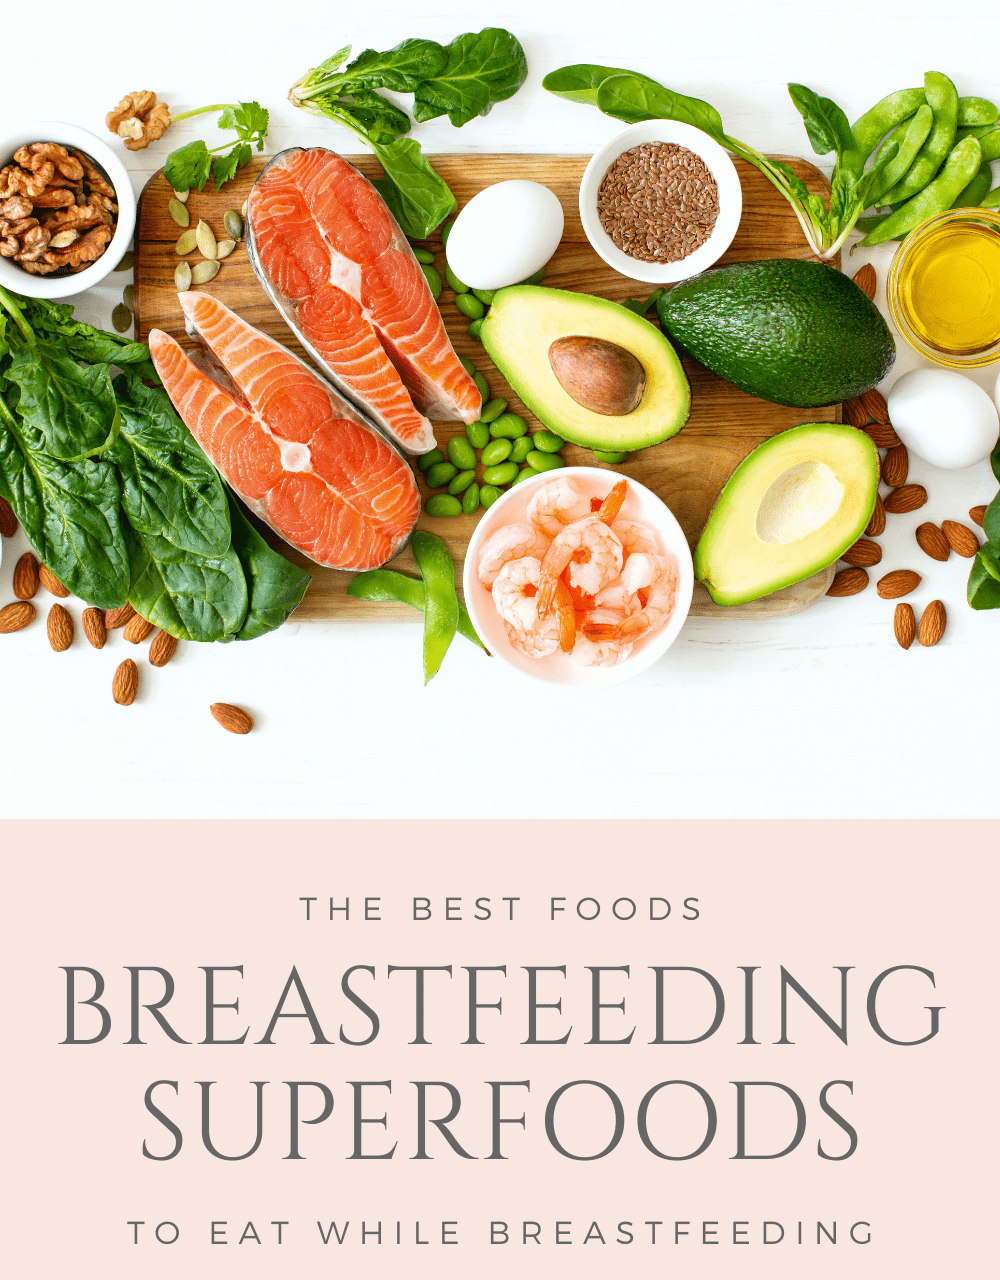 Breastfeeding Superfoods – The Best Foods to Eat While Breastfeeding